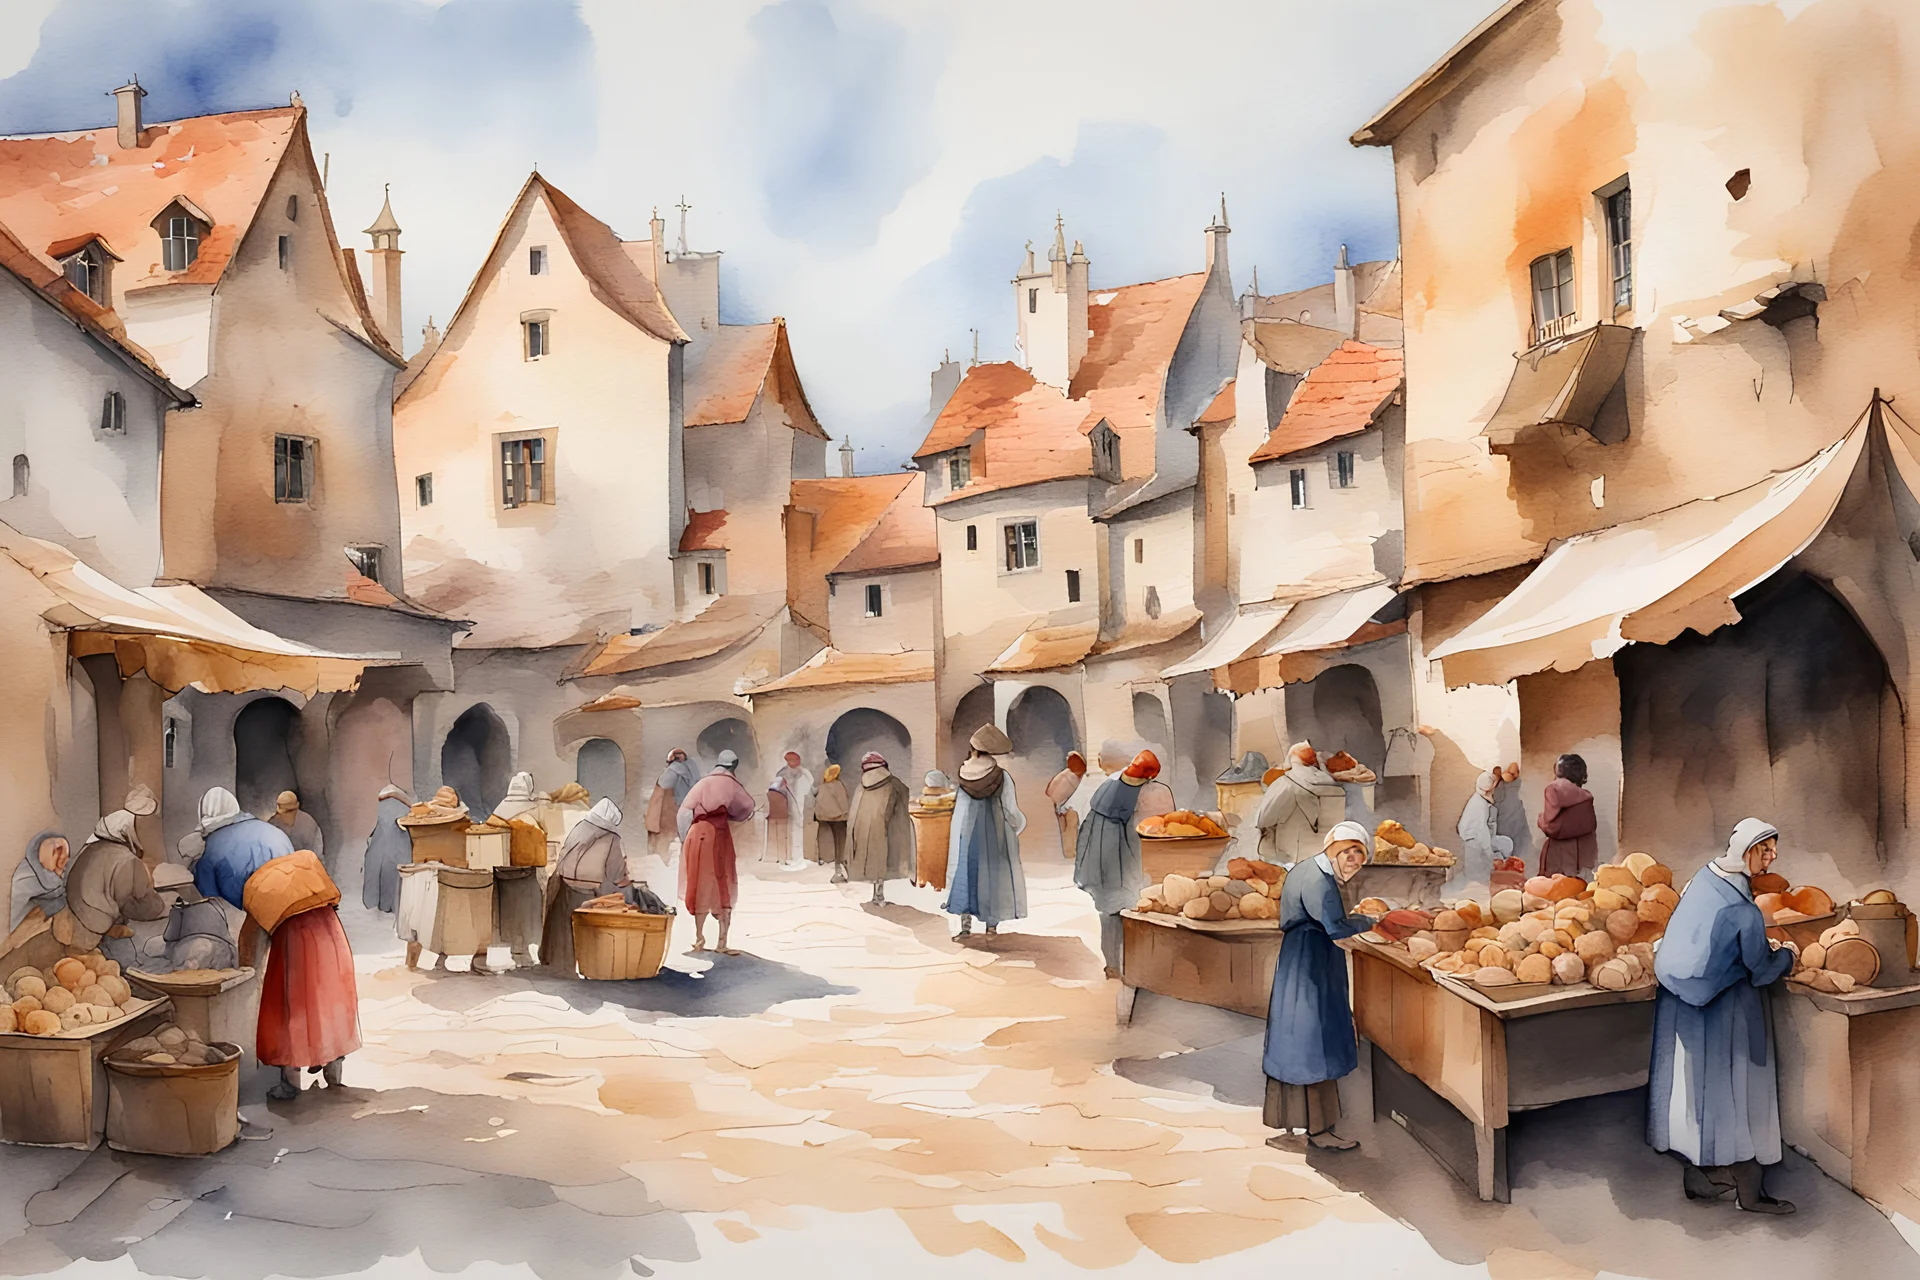 watercolor painting of a busy market square in a medieval village. bright